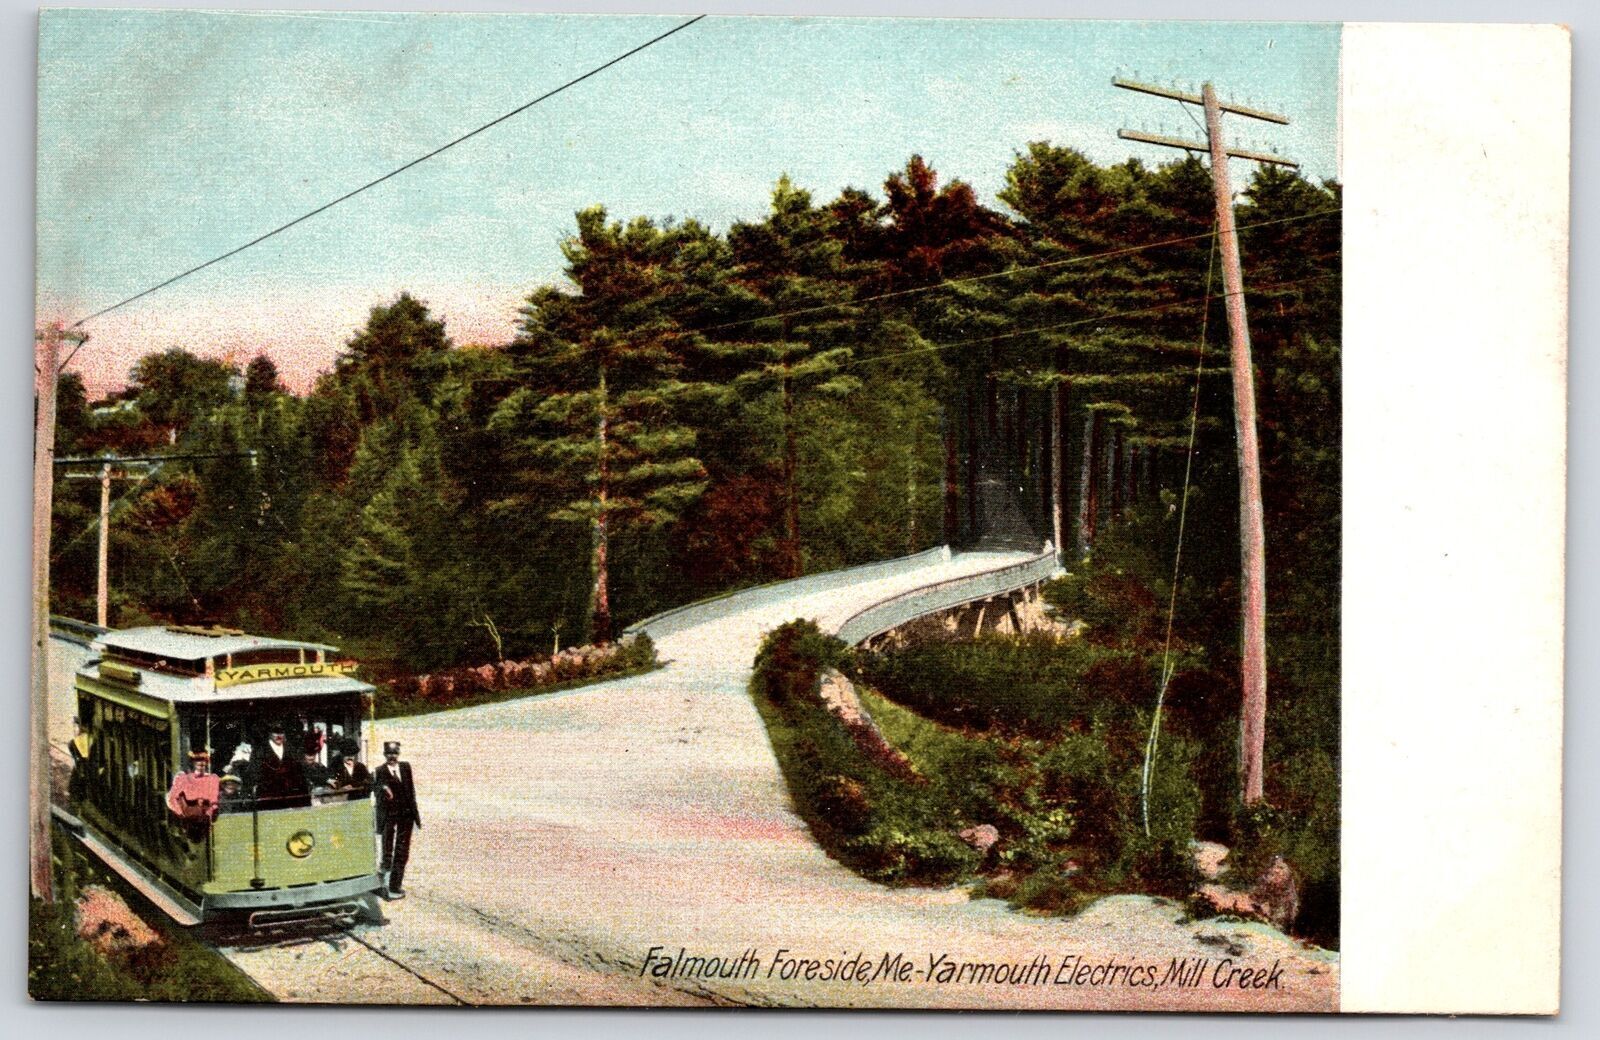 Falmouth Foreside Maine Yarmouth Electrics Mill Creek Pines Attractions Postcard